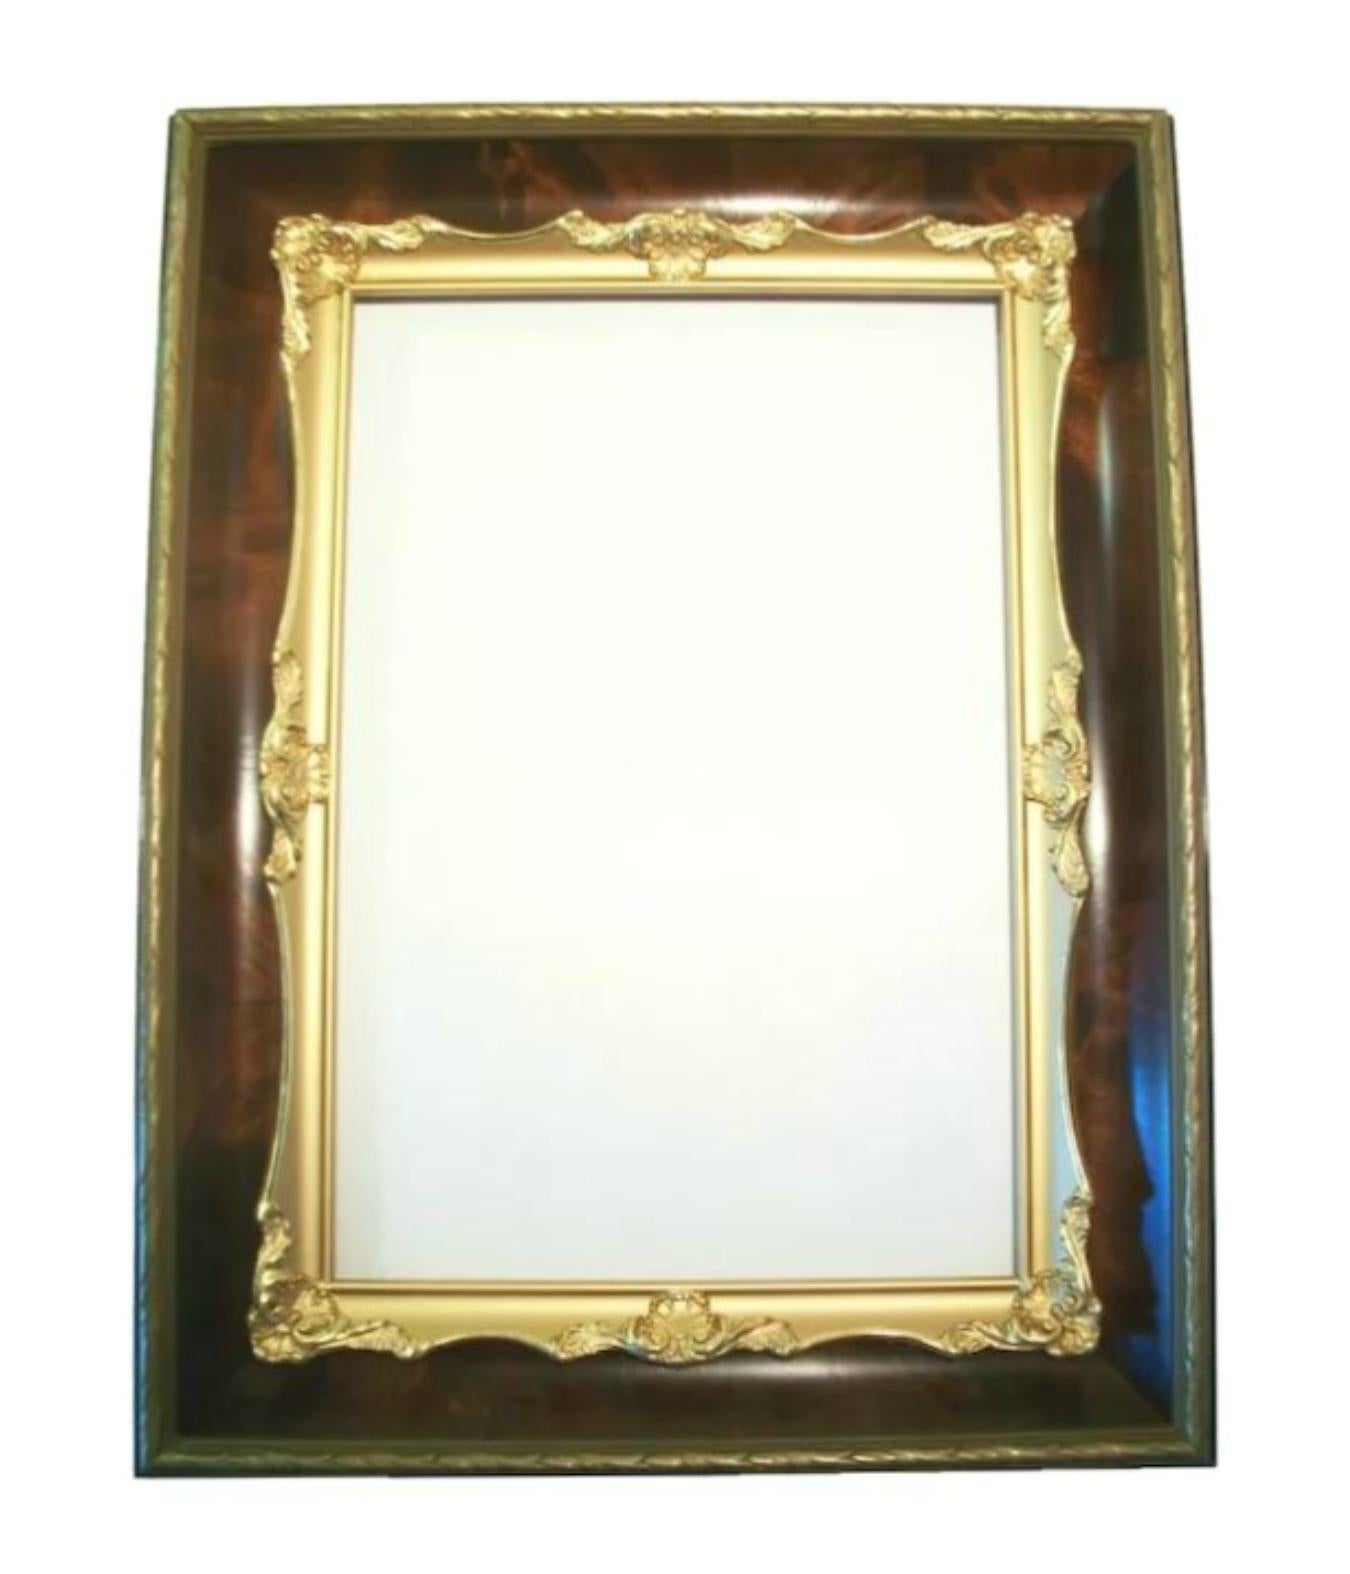 Antique Louis XVI style picture frame - veneered outer frame - separate inset veneered inner frame - elaborate gilt over gesso fillet - with glass - may be hung vertical or horizontal - early 20th century.

Excellent antique condition - minor